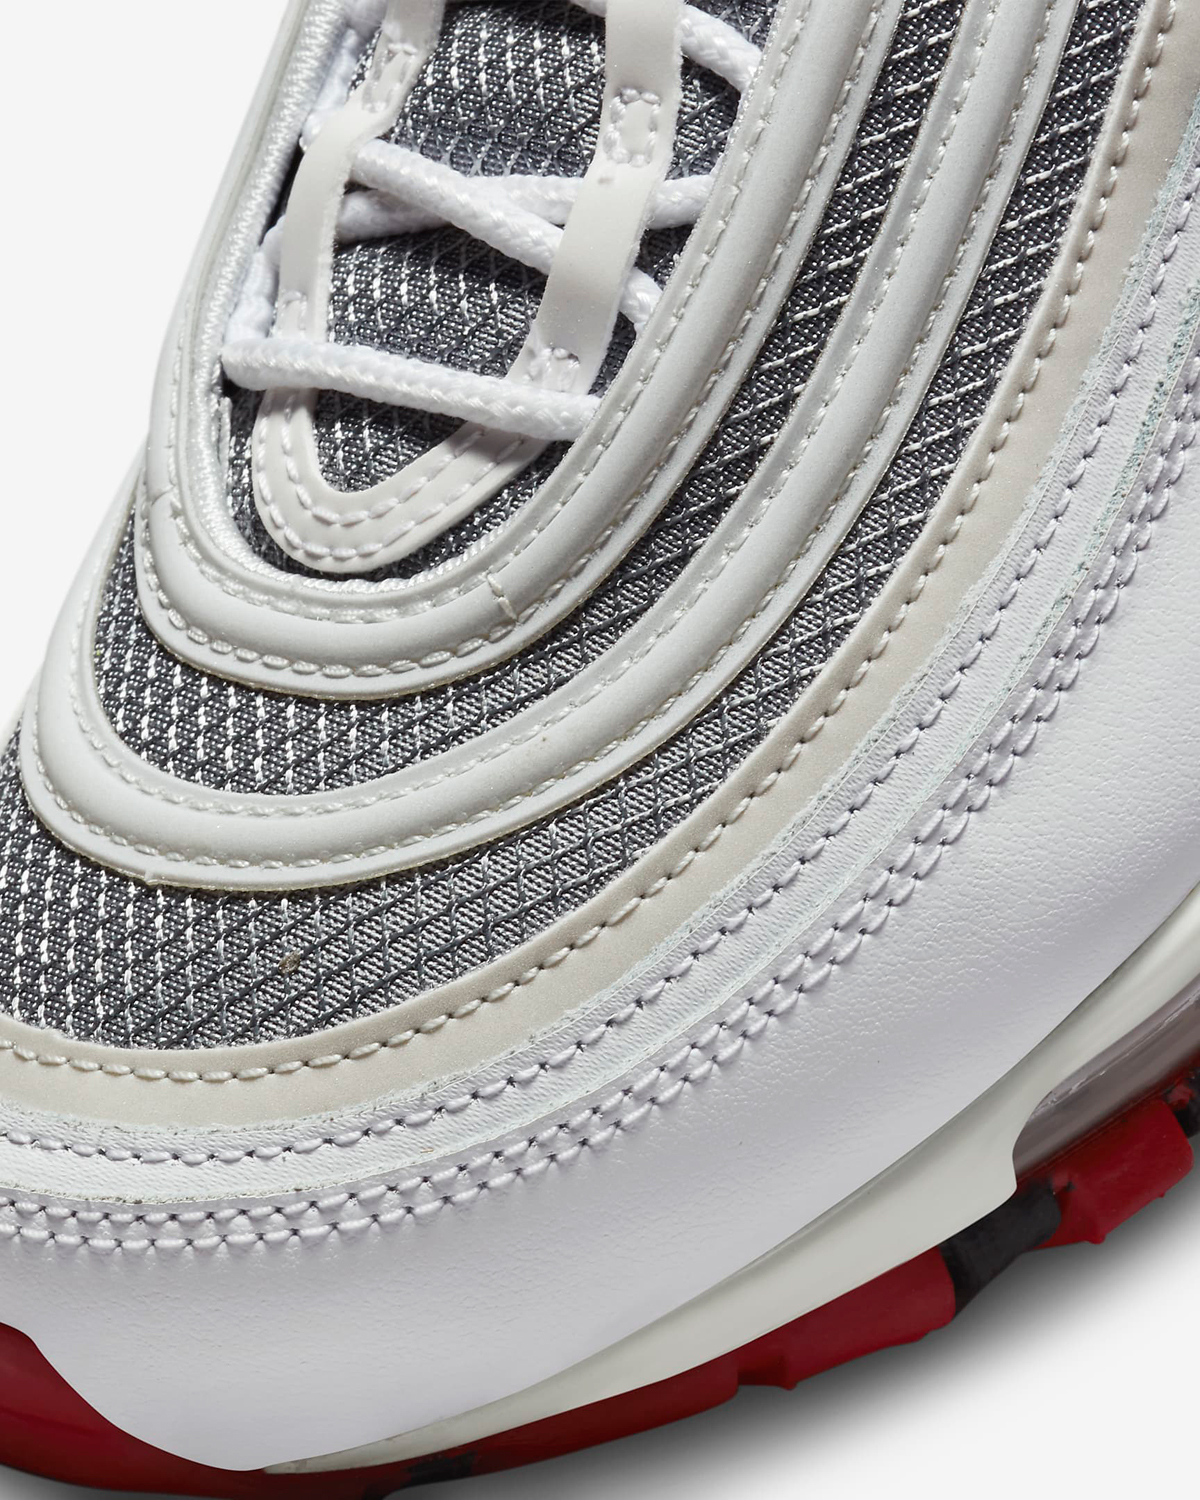 nike-air-max-97-prototype-white-particle-grey-photon-dust-varsity-red-release-date-6